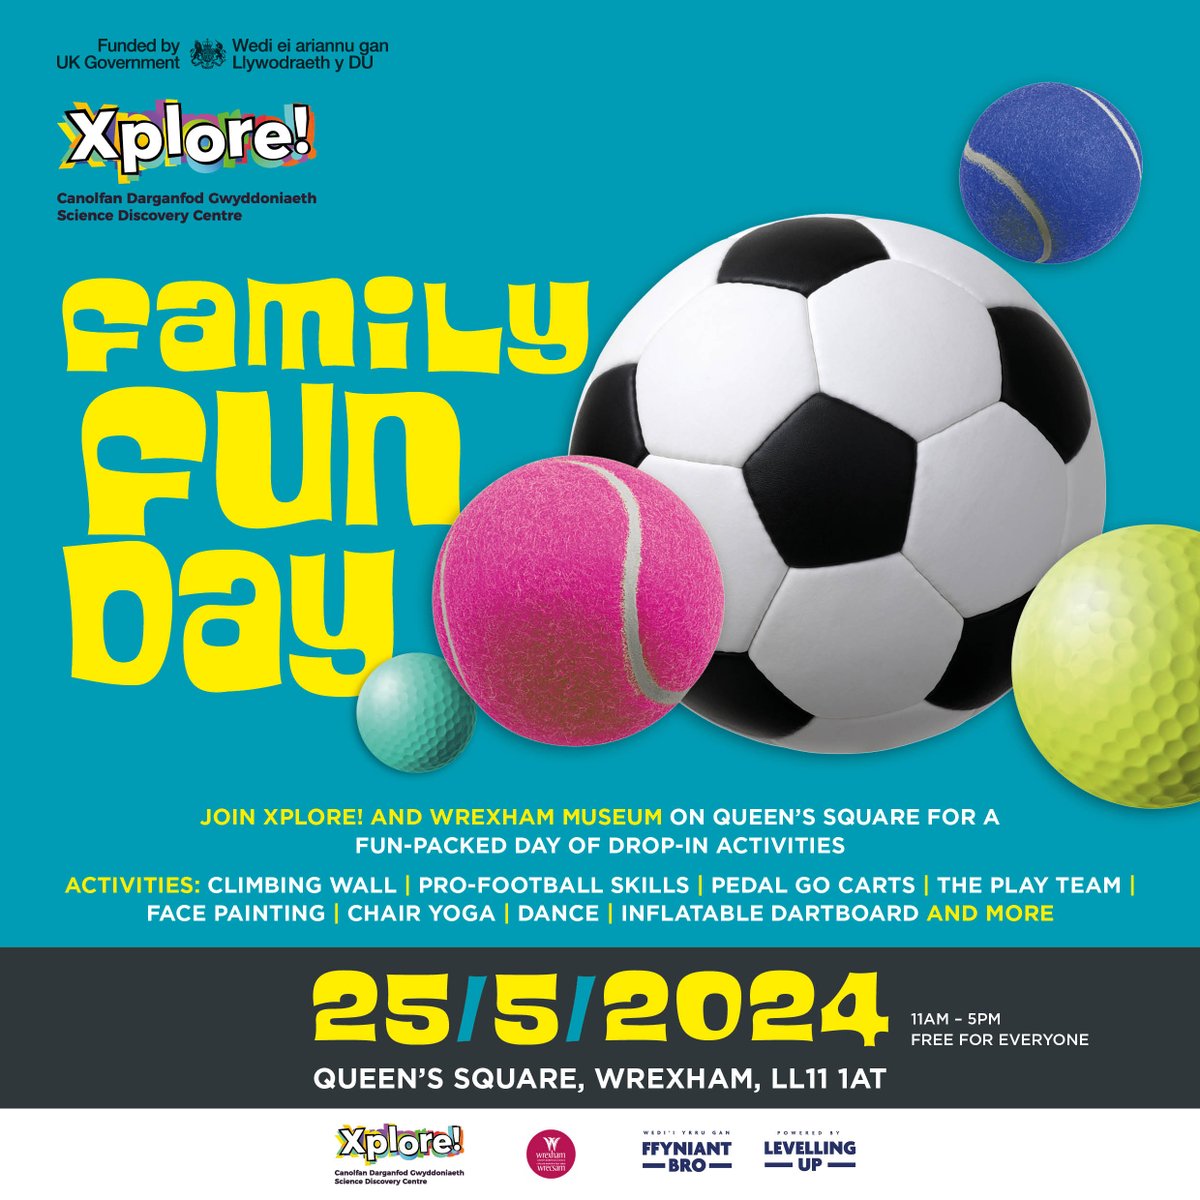 It's almost time! Join Xplore! and Wrexham museum for a FREE Family Funday in the heart of Wrexham City Centre! ⚽🏈 📅 24/05/2024 📍 Queen's Square, Wrexham #UKSPF #WCBC